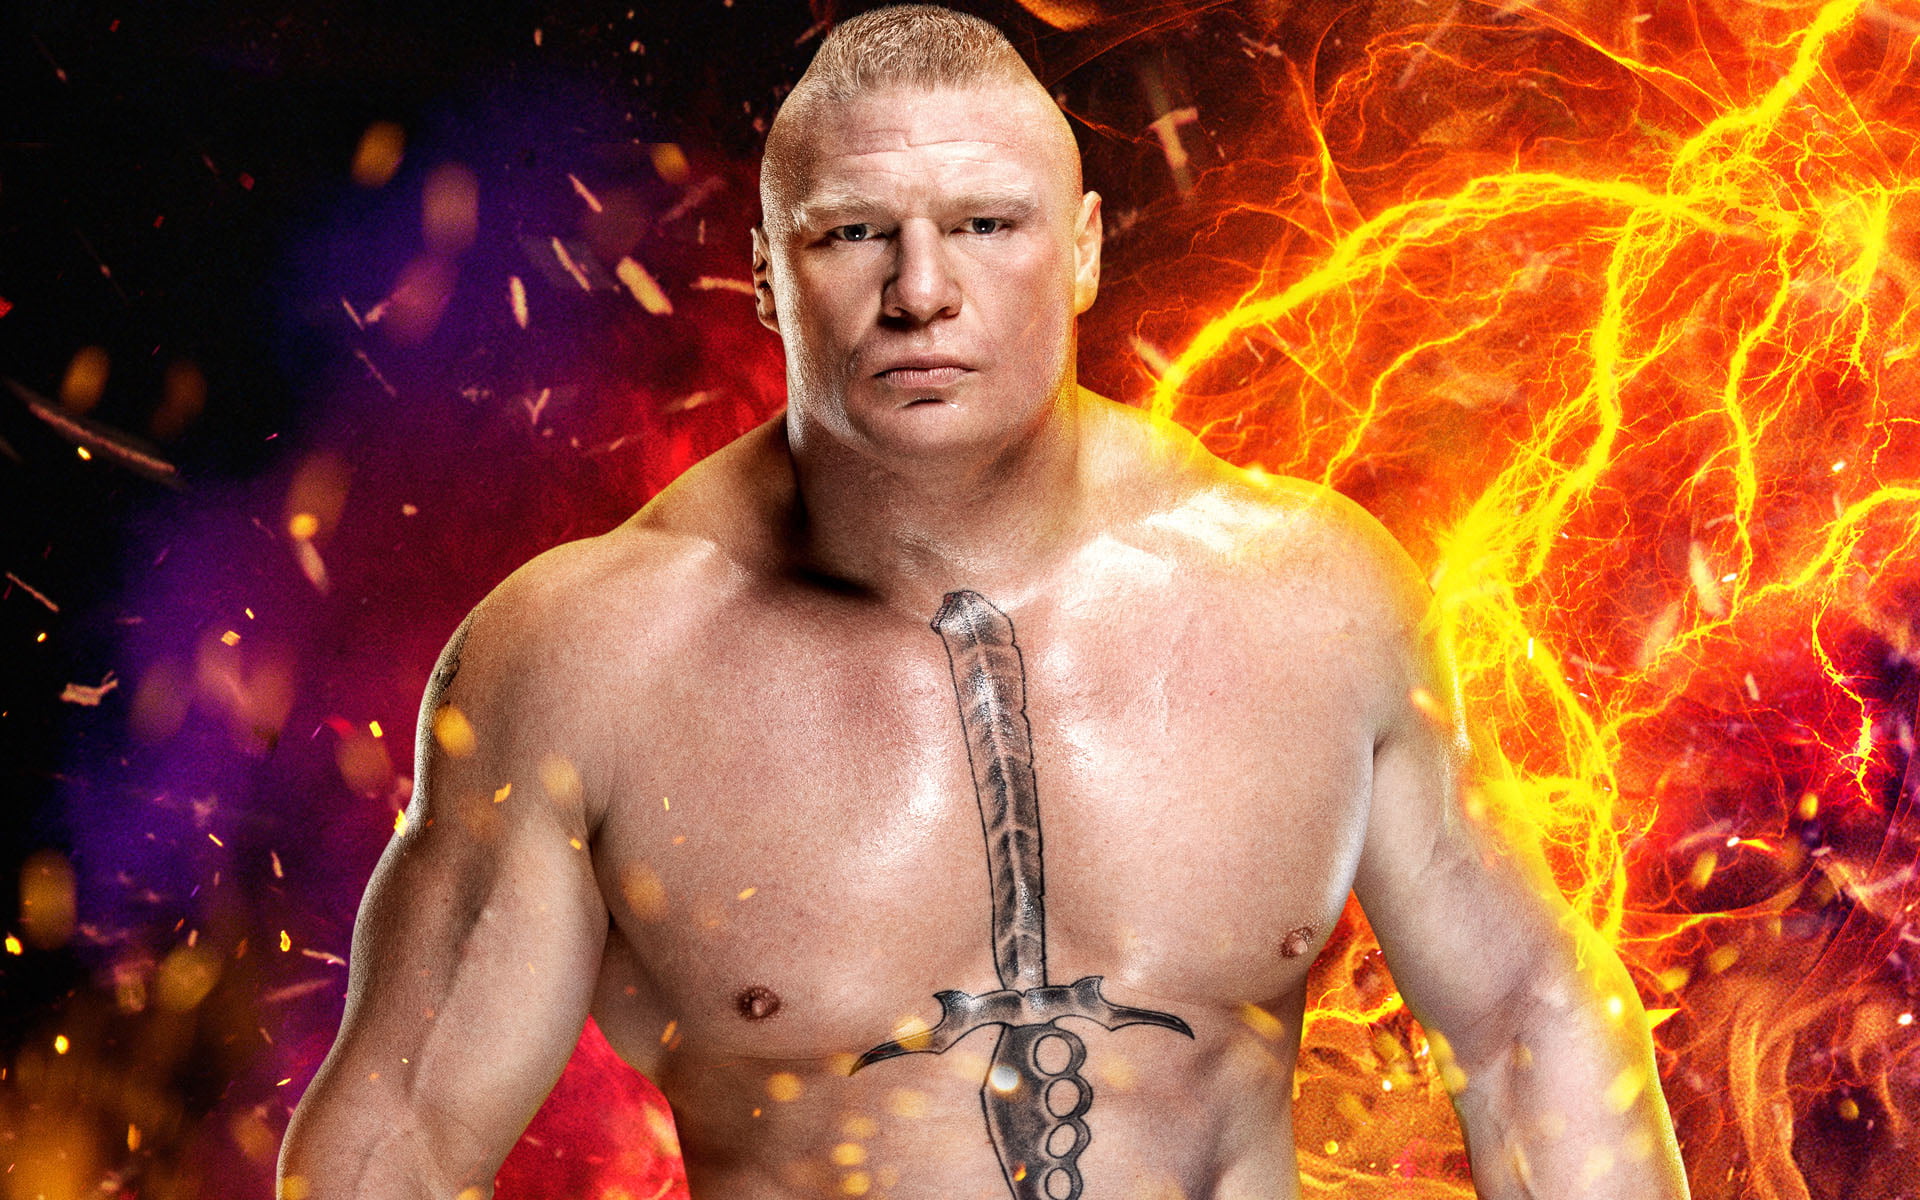 WWE 2K17 Brock Lesnar, WWE fighter, Games, shirtless, one person